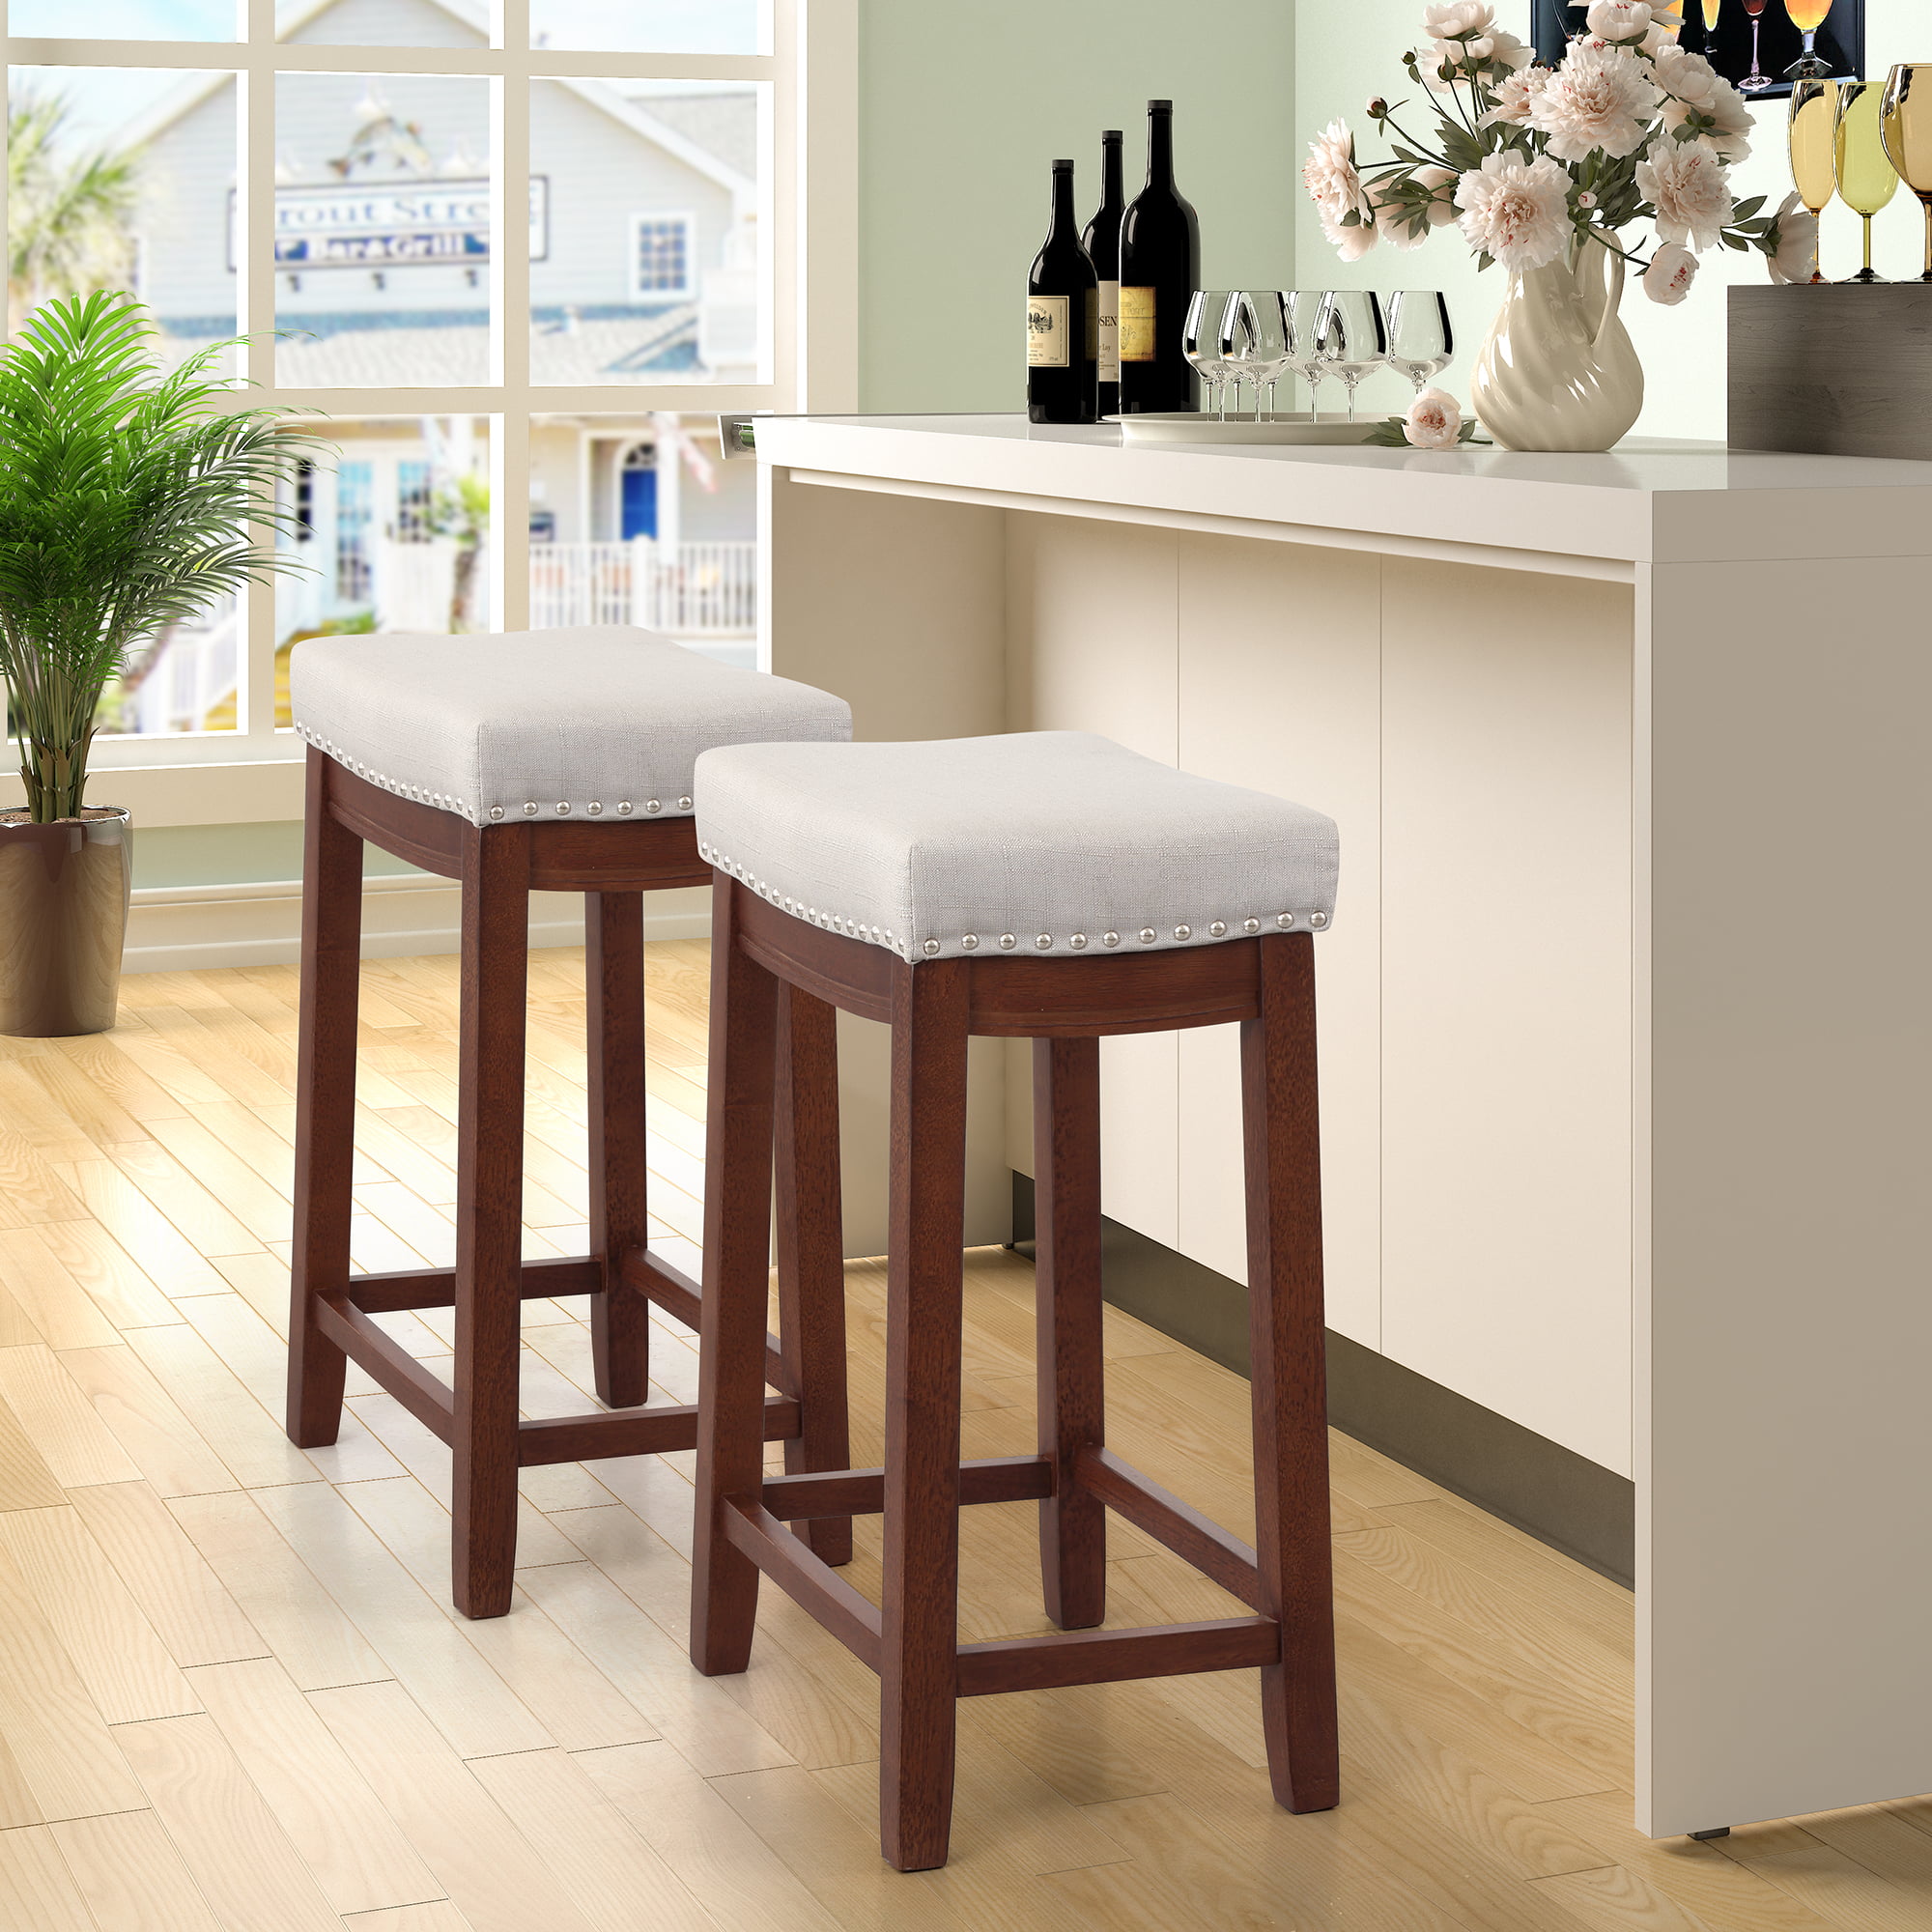 24" Bar Stools with Upholstered Seat, Counter Height Bar Stools Set of